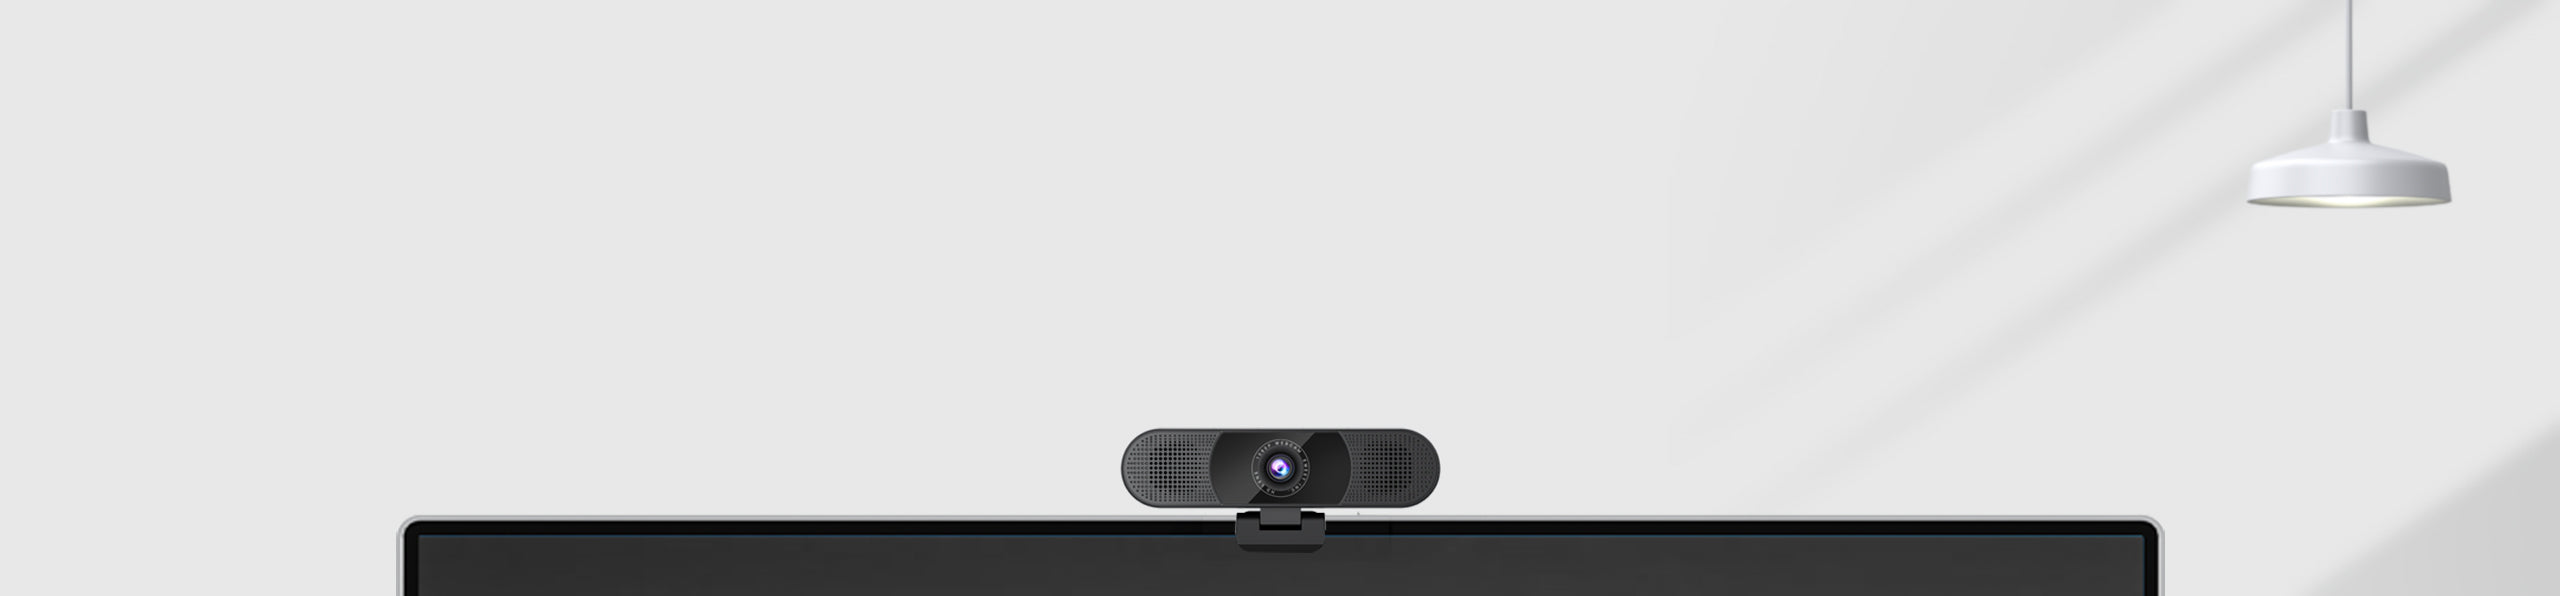 Webcam with Microphone and Speaker C980 Pro